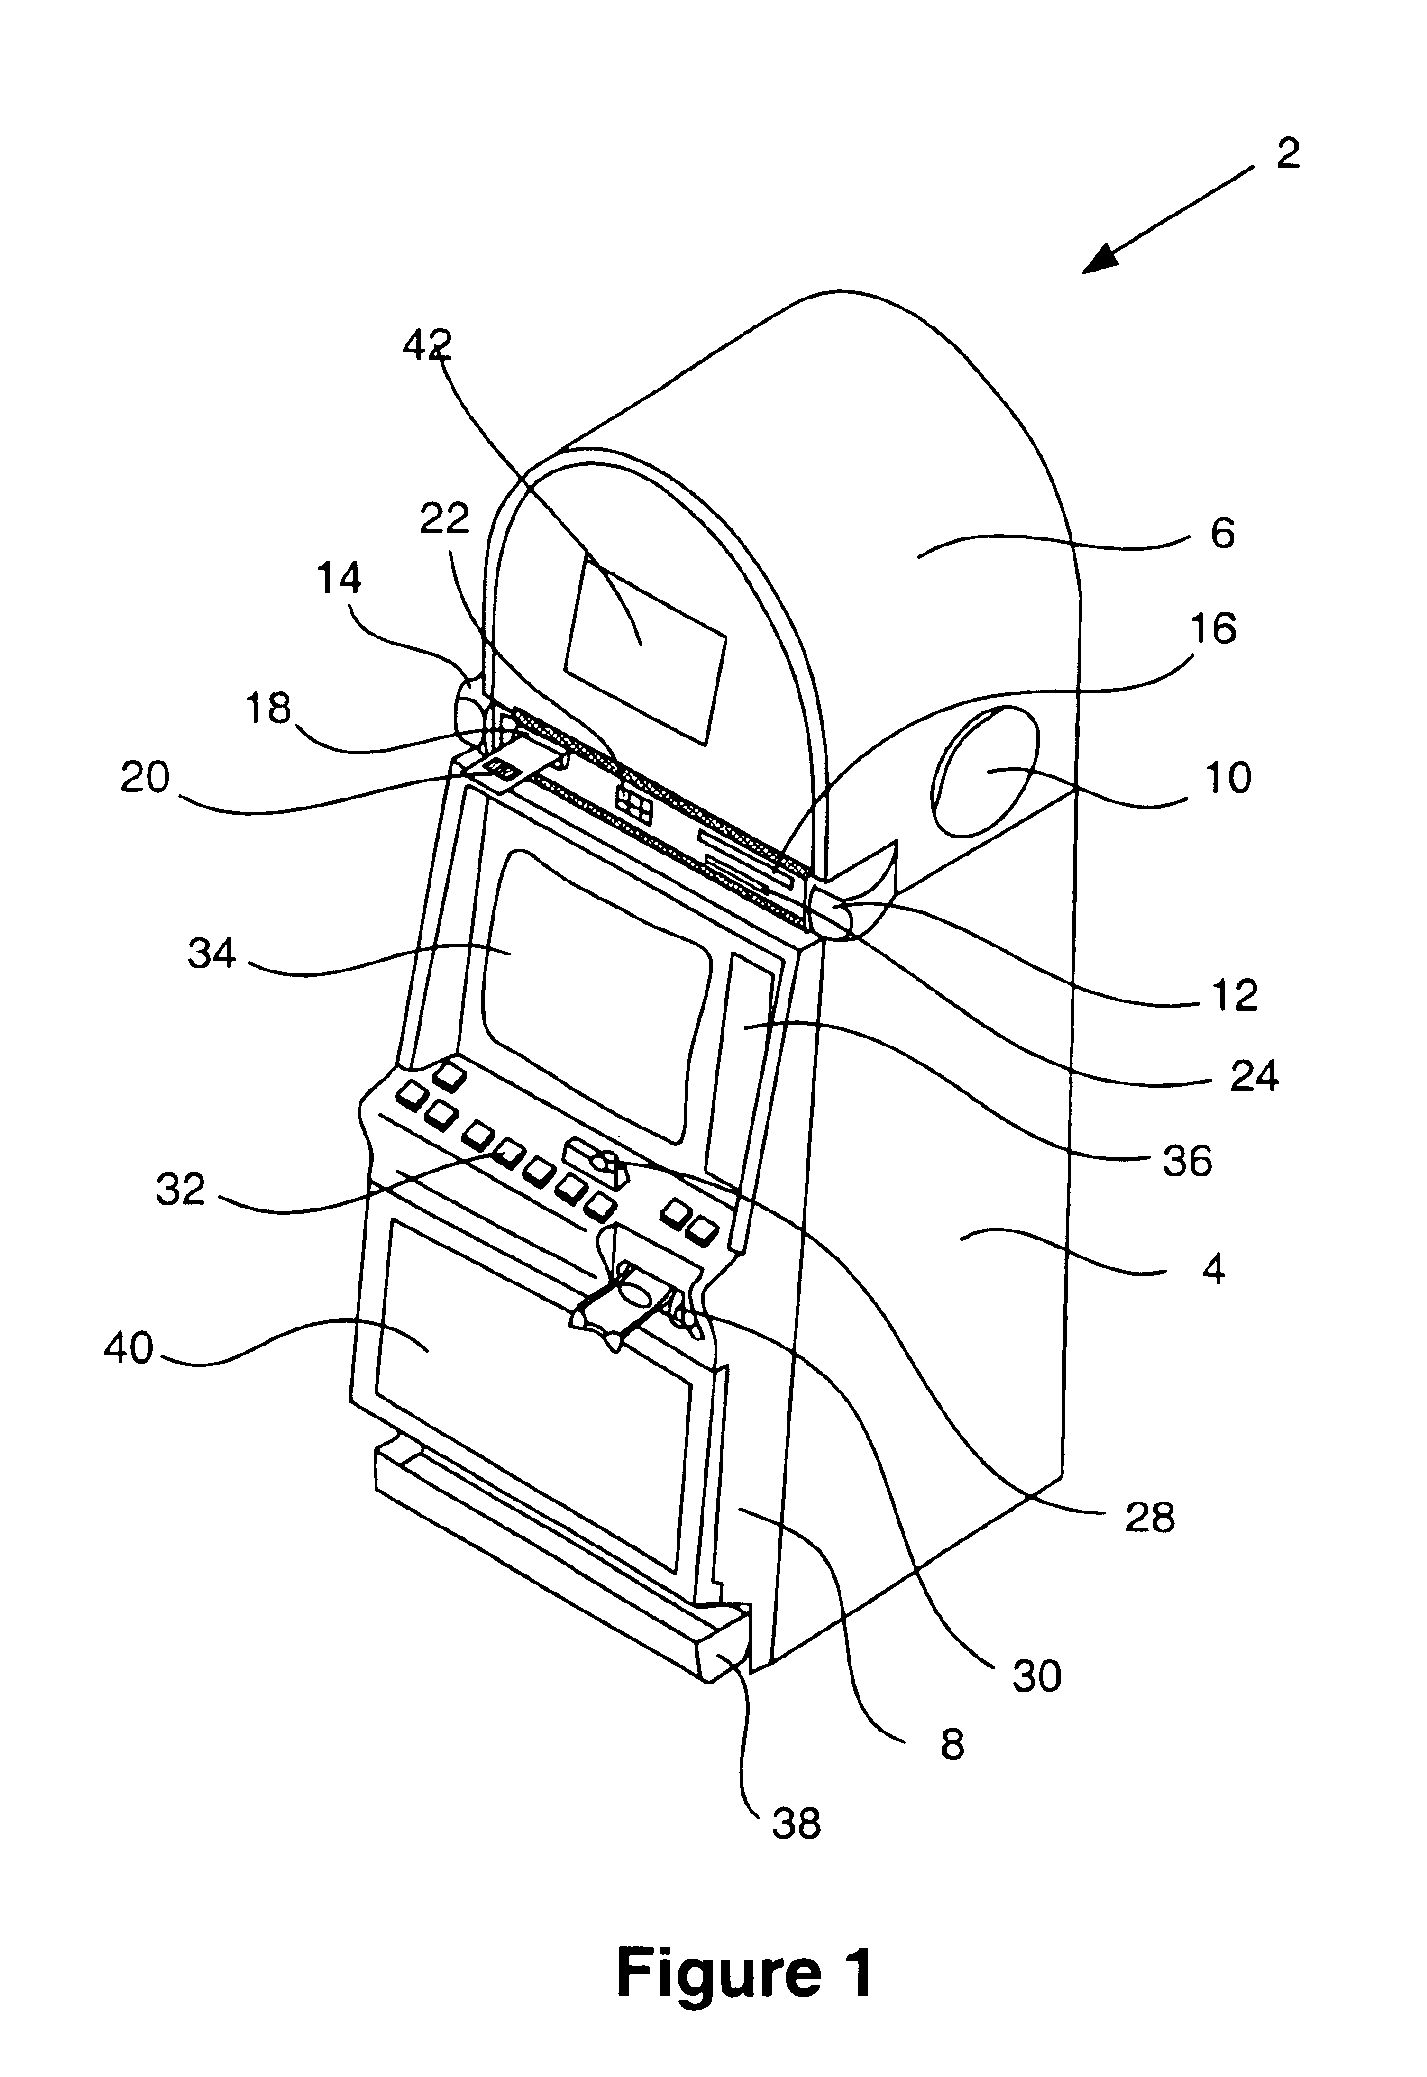 Method and apparatus for providing entertainment content on a gaming machine